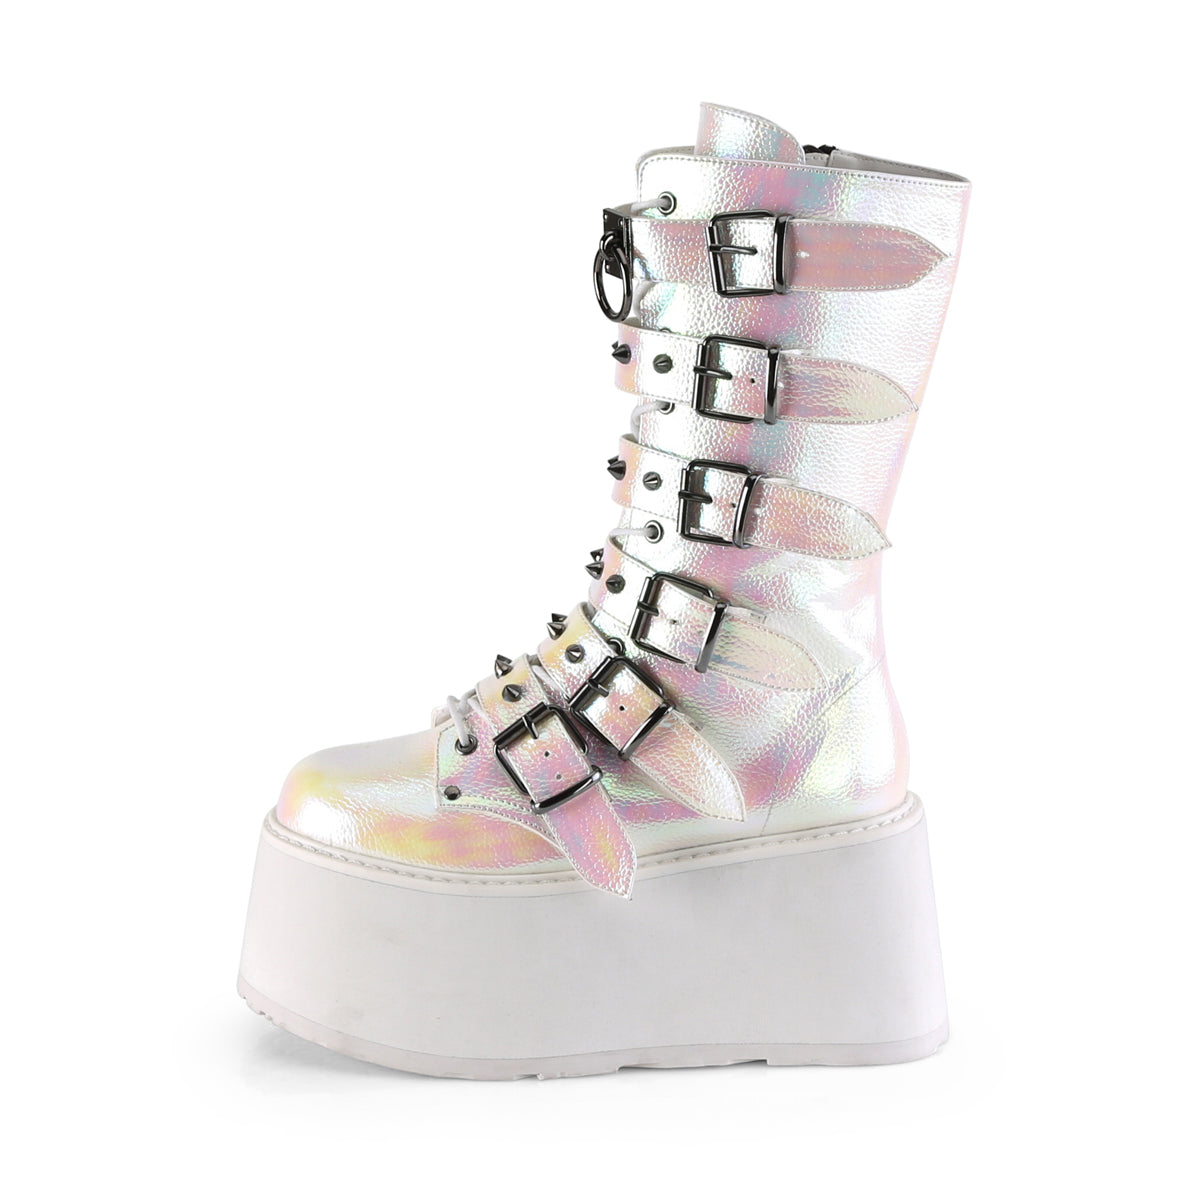 DemoniaCult Womens Boots DAMNED-225 Pearl Iridescent Vegan Leather